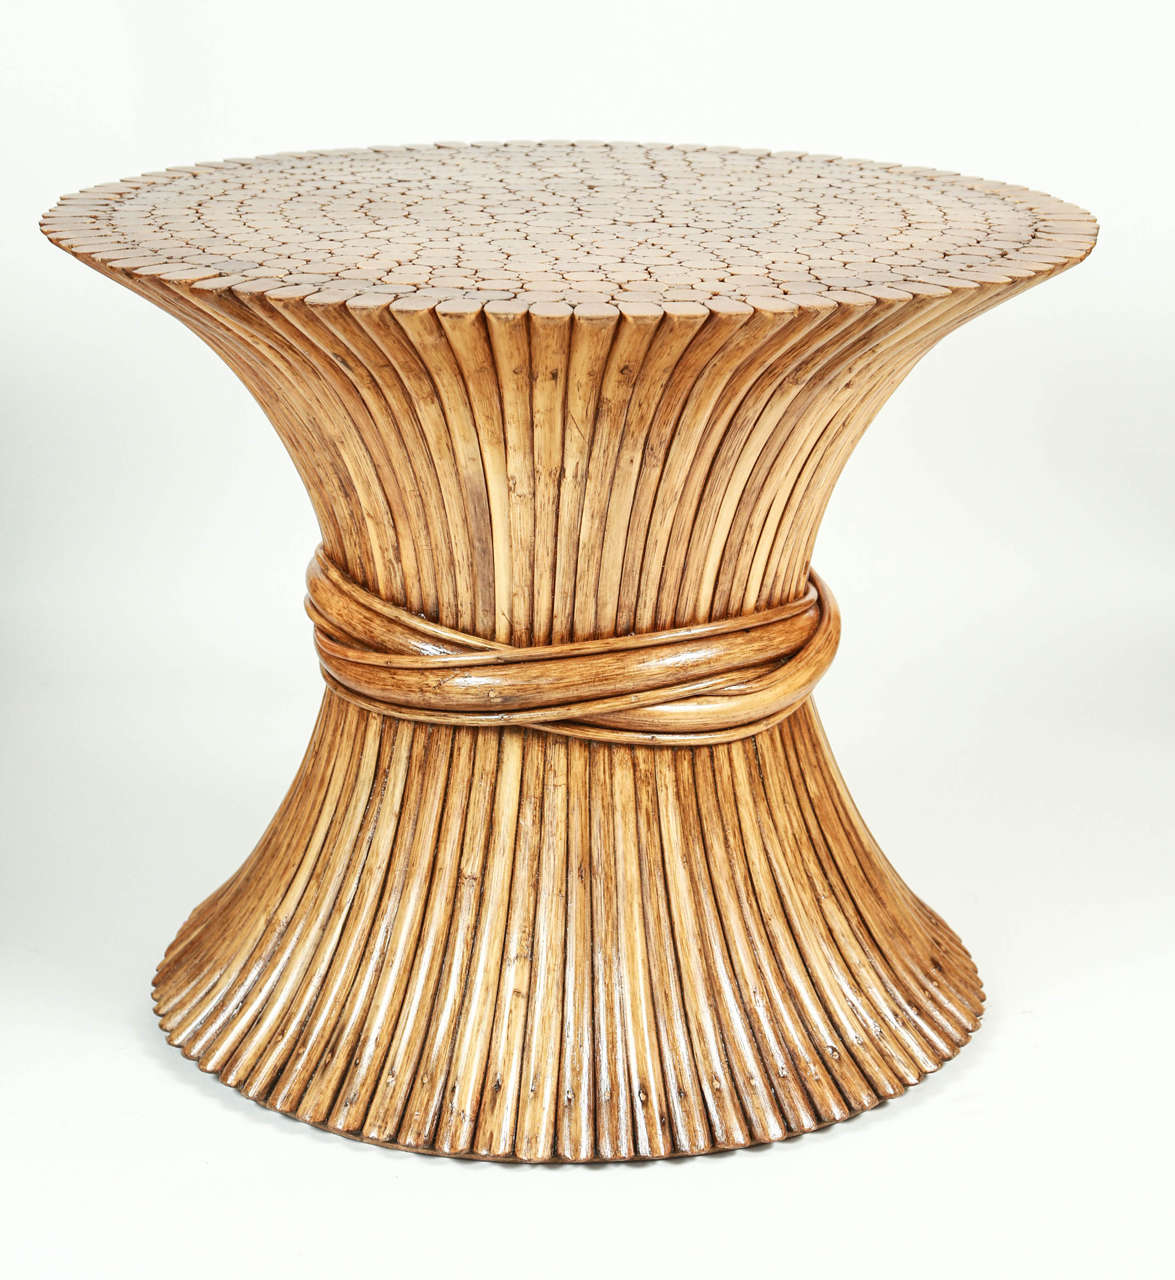 Mid-Century table of rattan bundled together resembling a sheath of wheat. Has been cleaned and new lacquer finish.